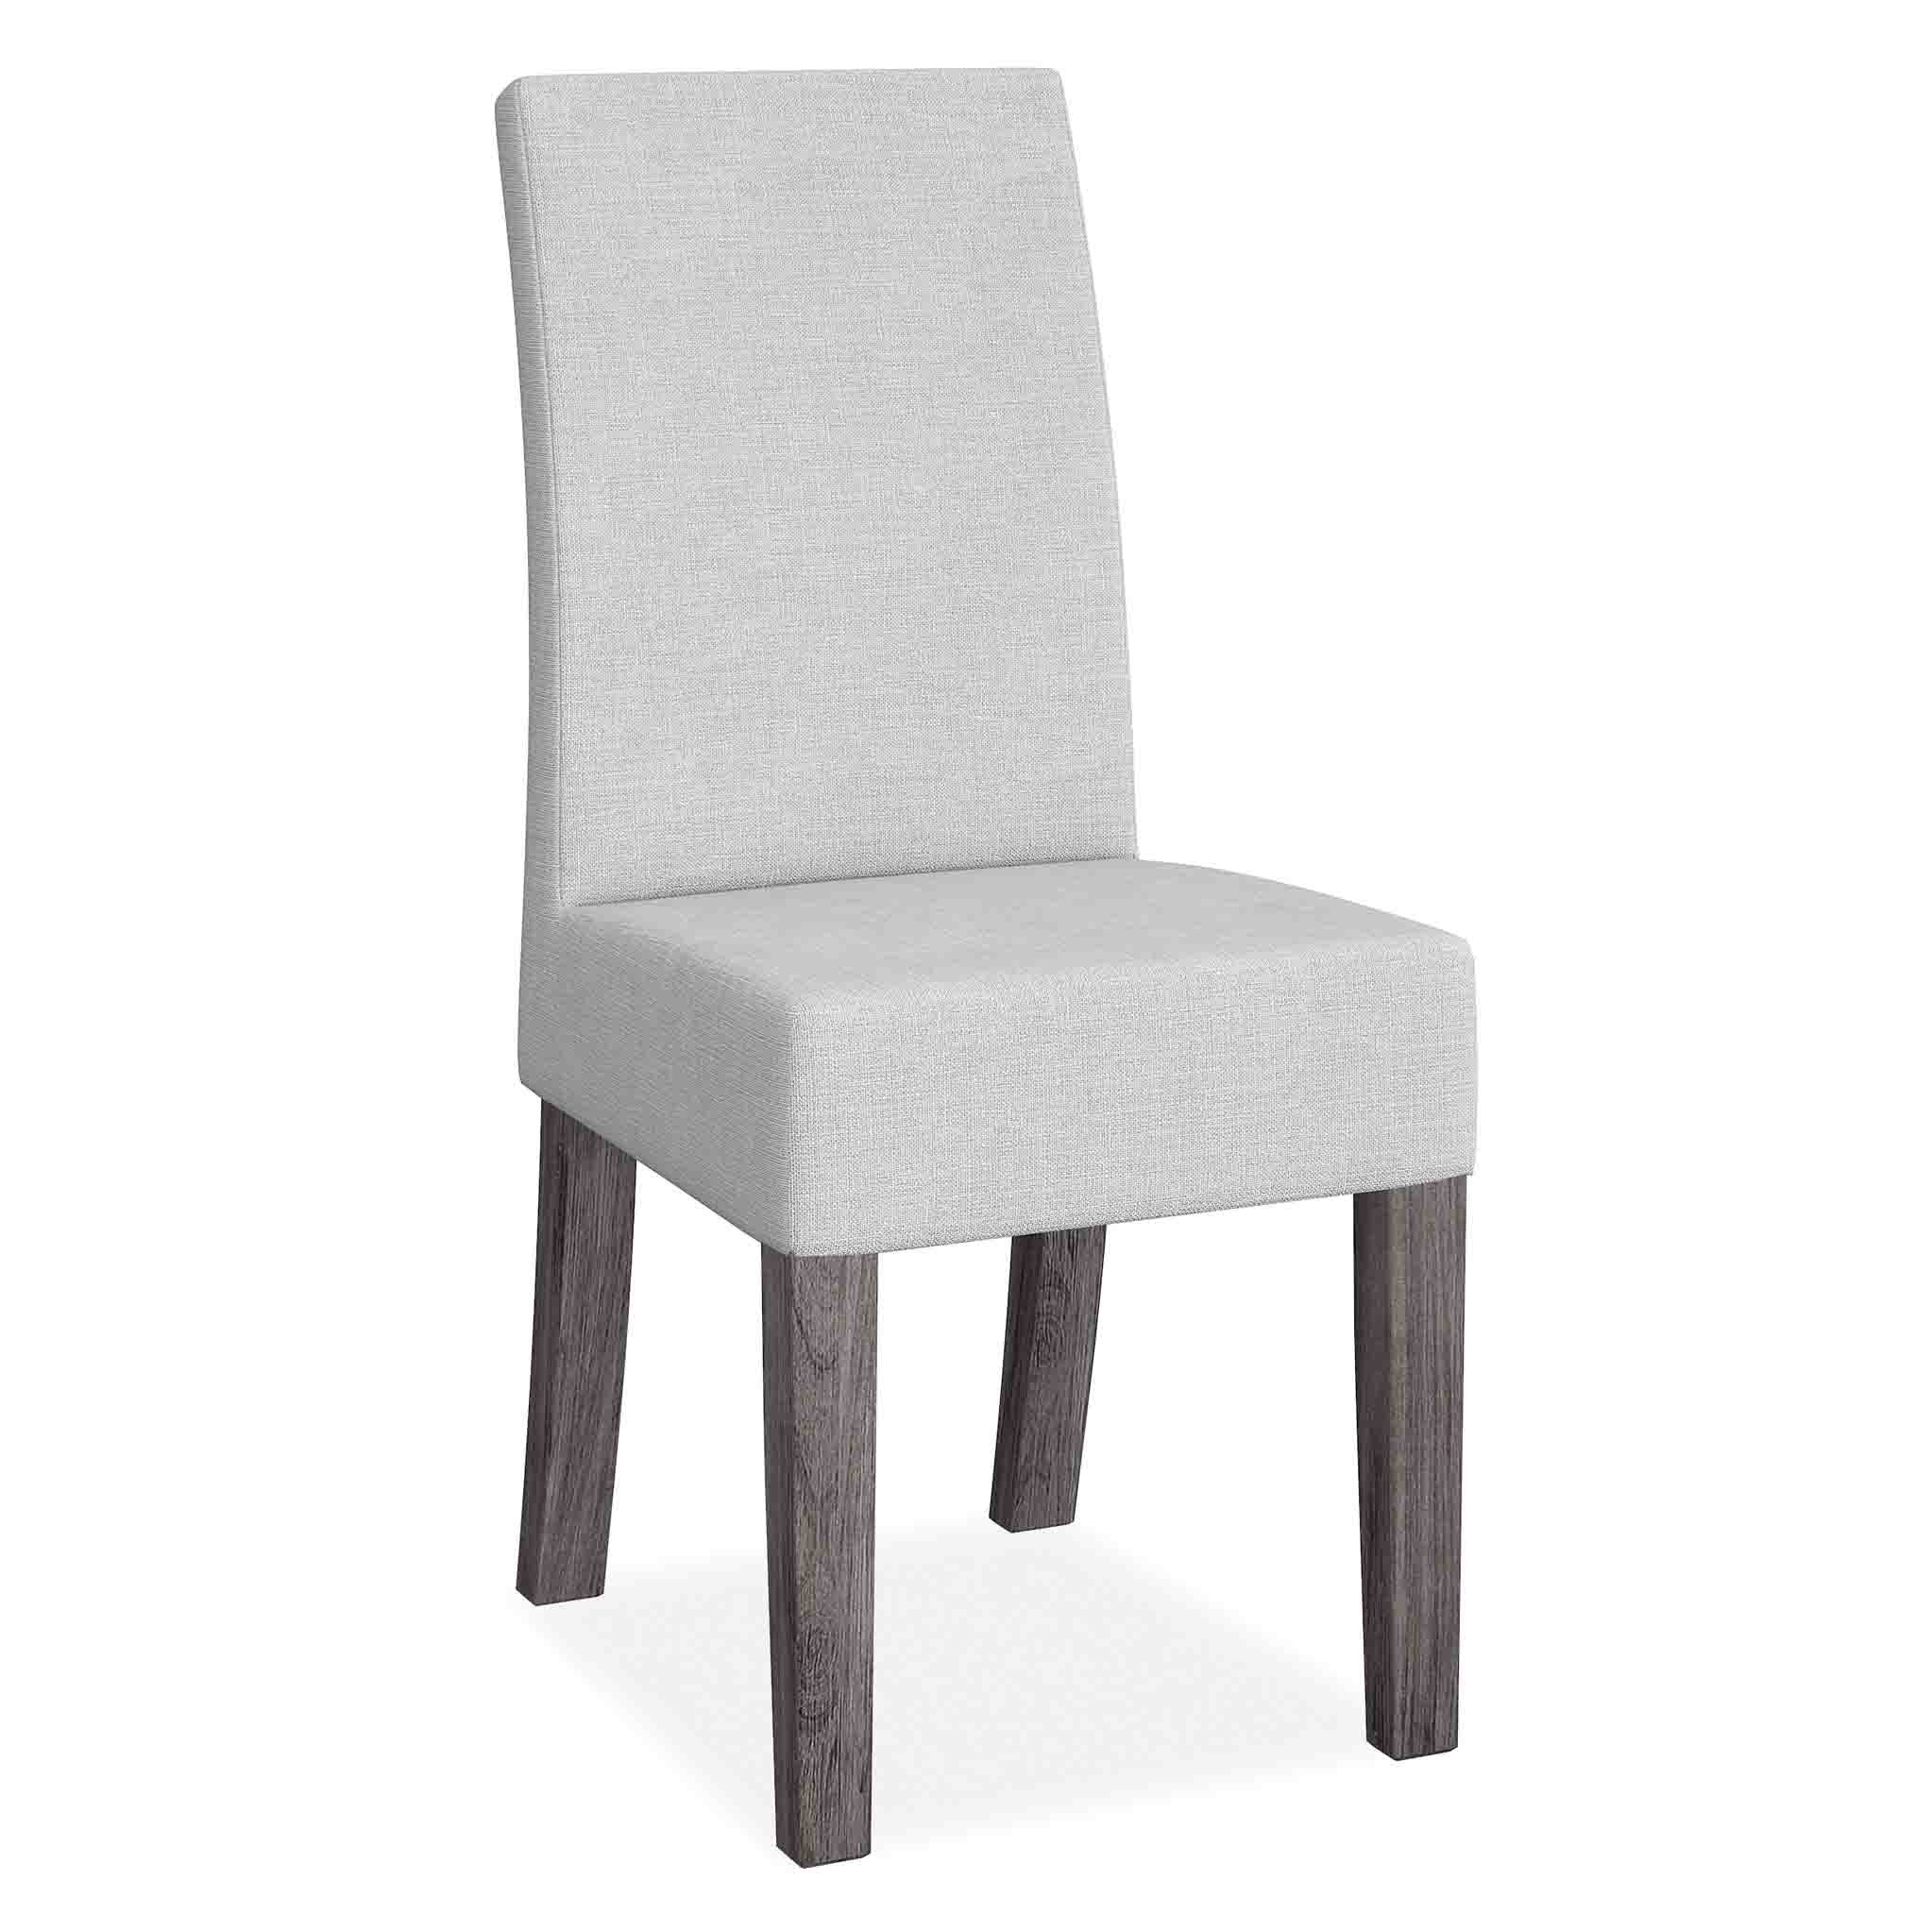 Saltaire Grey Industrial Concrete Effect Fabric Dining Chair